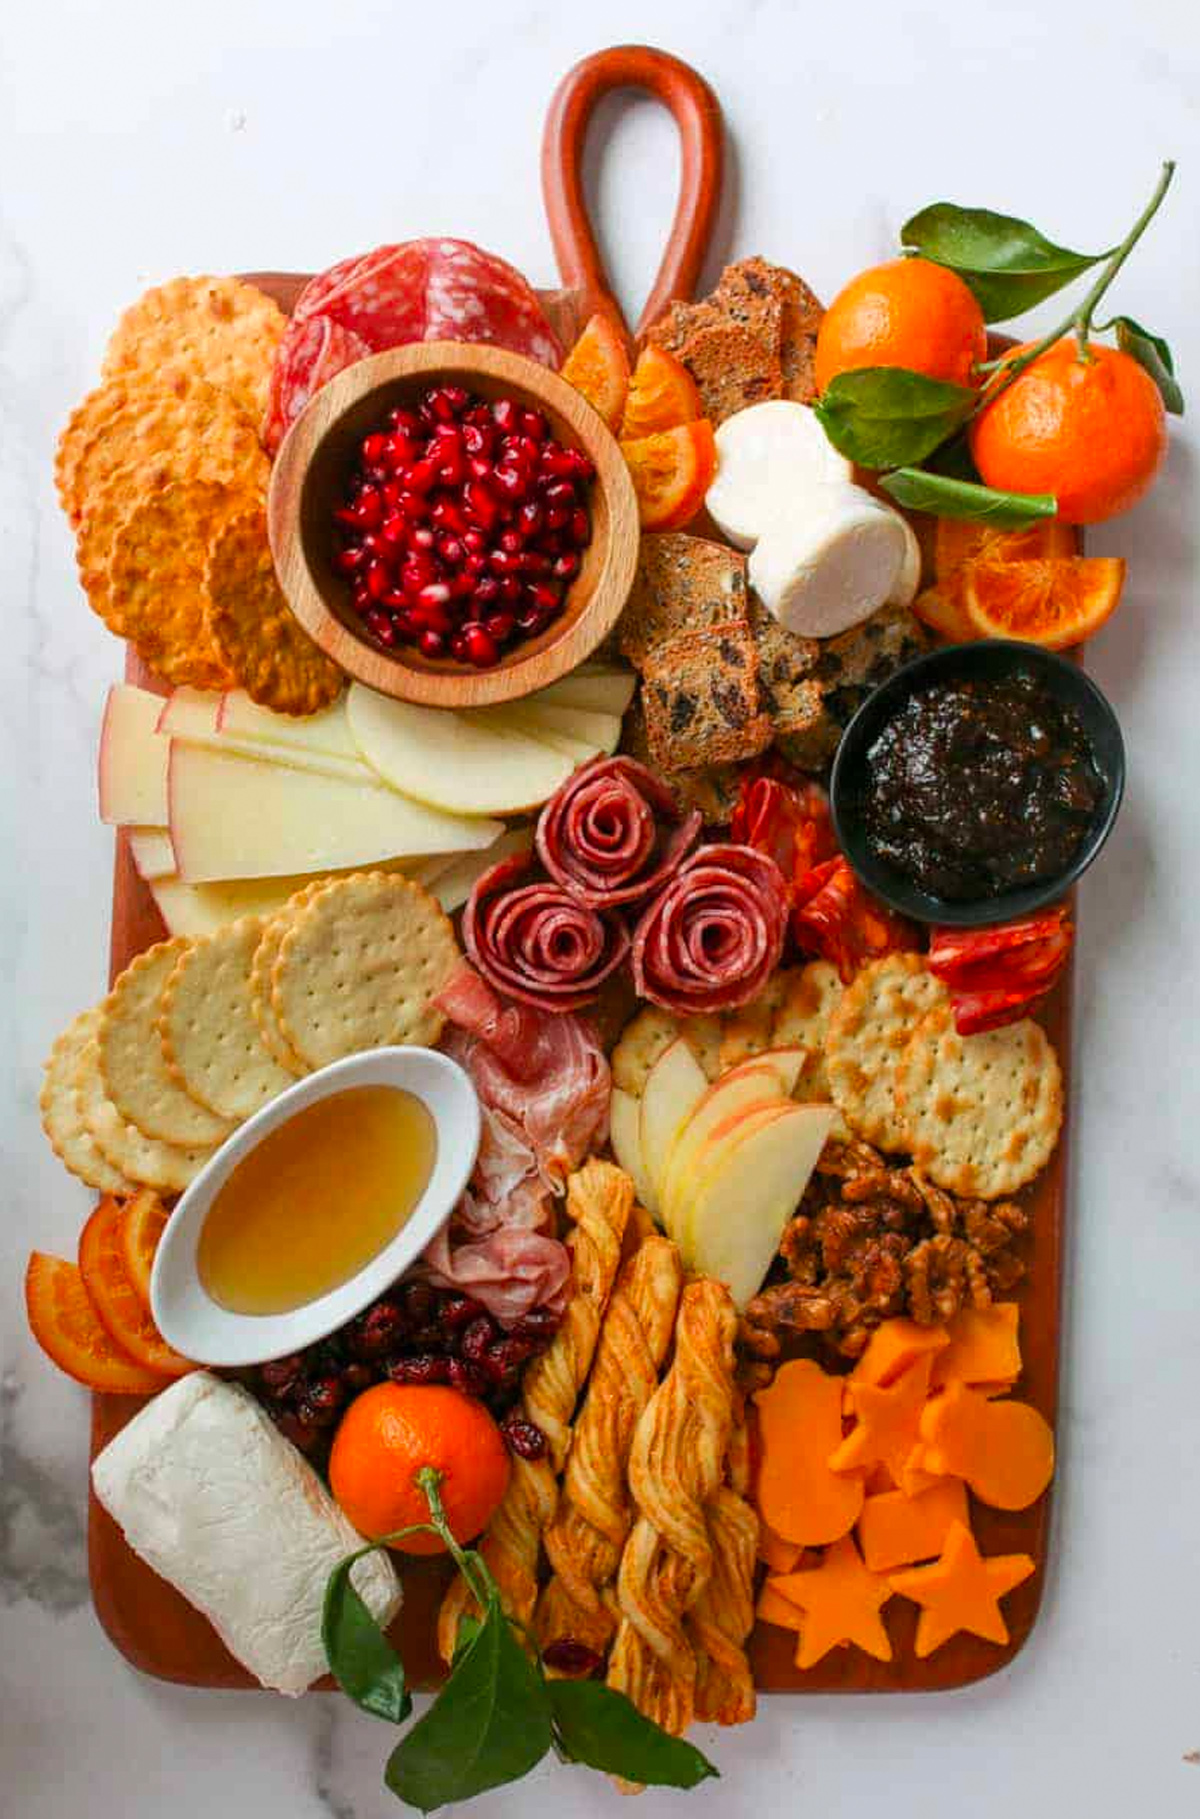 Make with Mara's winter board includes pomegranates, meat. cheese, clementine's, and crackers.